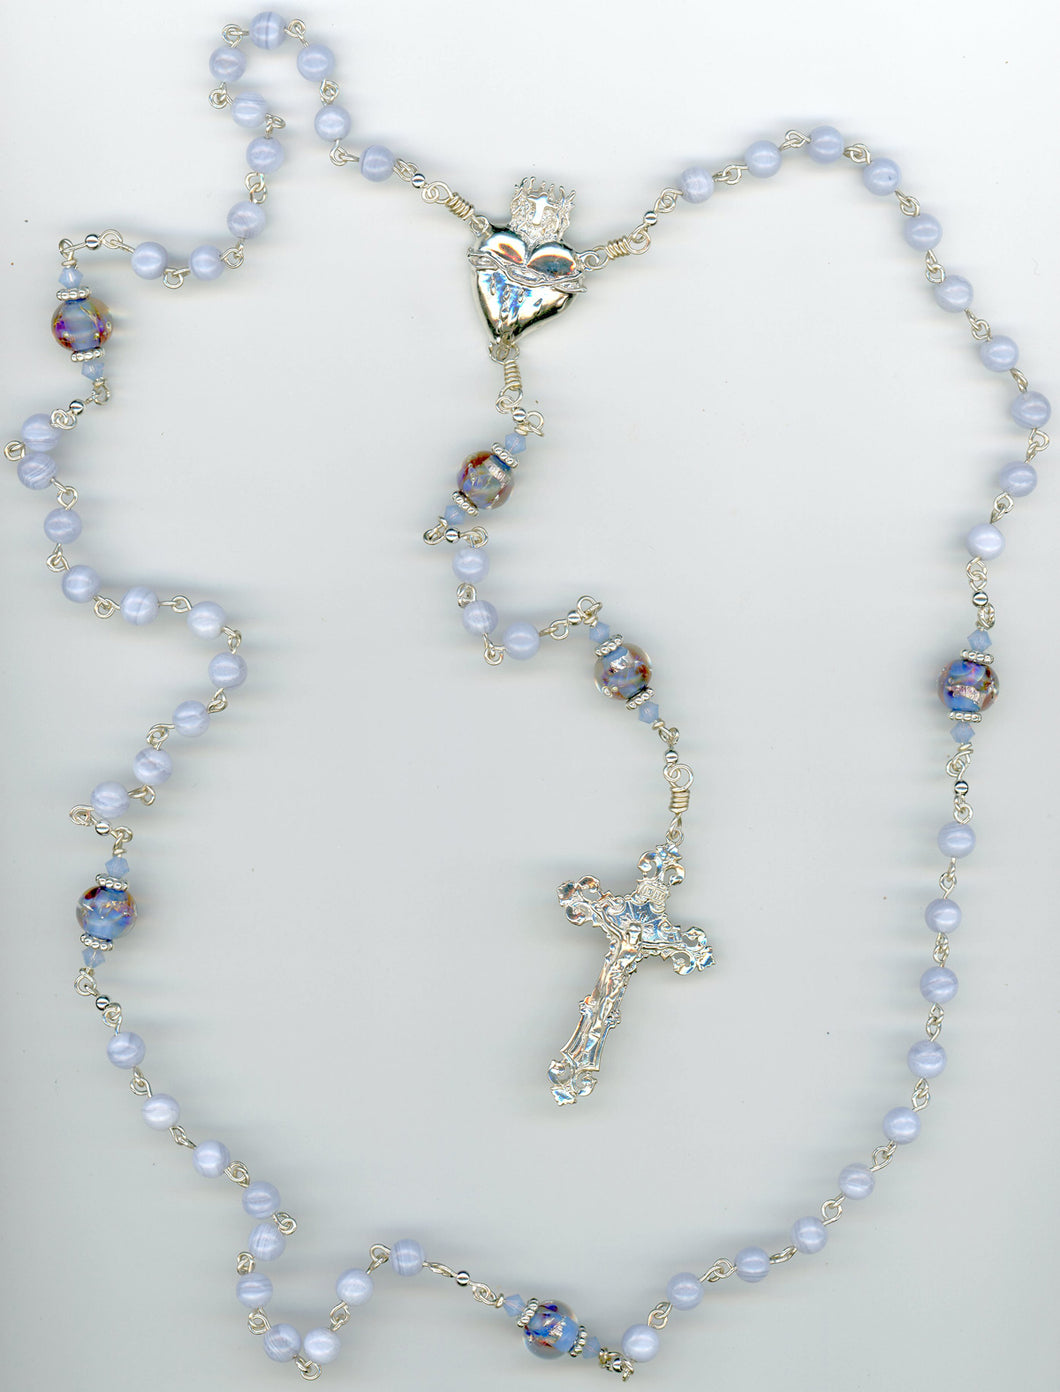 Blue Lace Agate Rosary with Large Sacred Heart